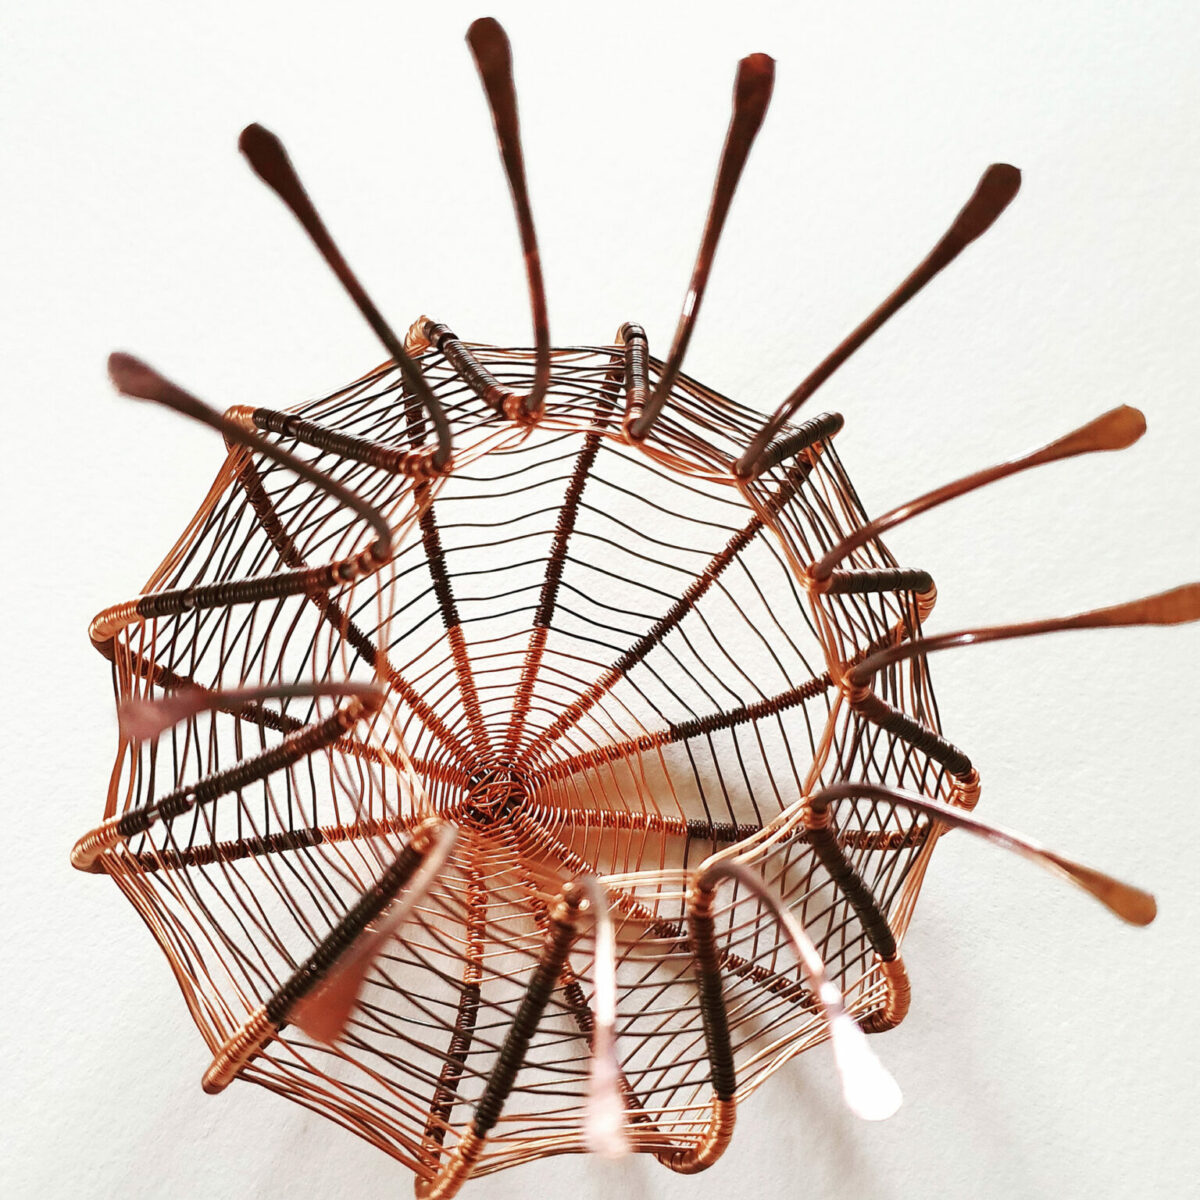 Fascinating Organic Shaped Copper Wire Sculptures By Sally Blake 8